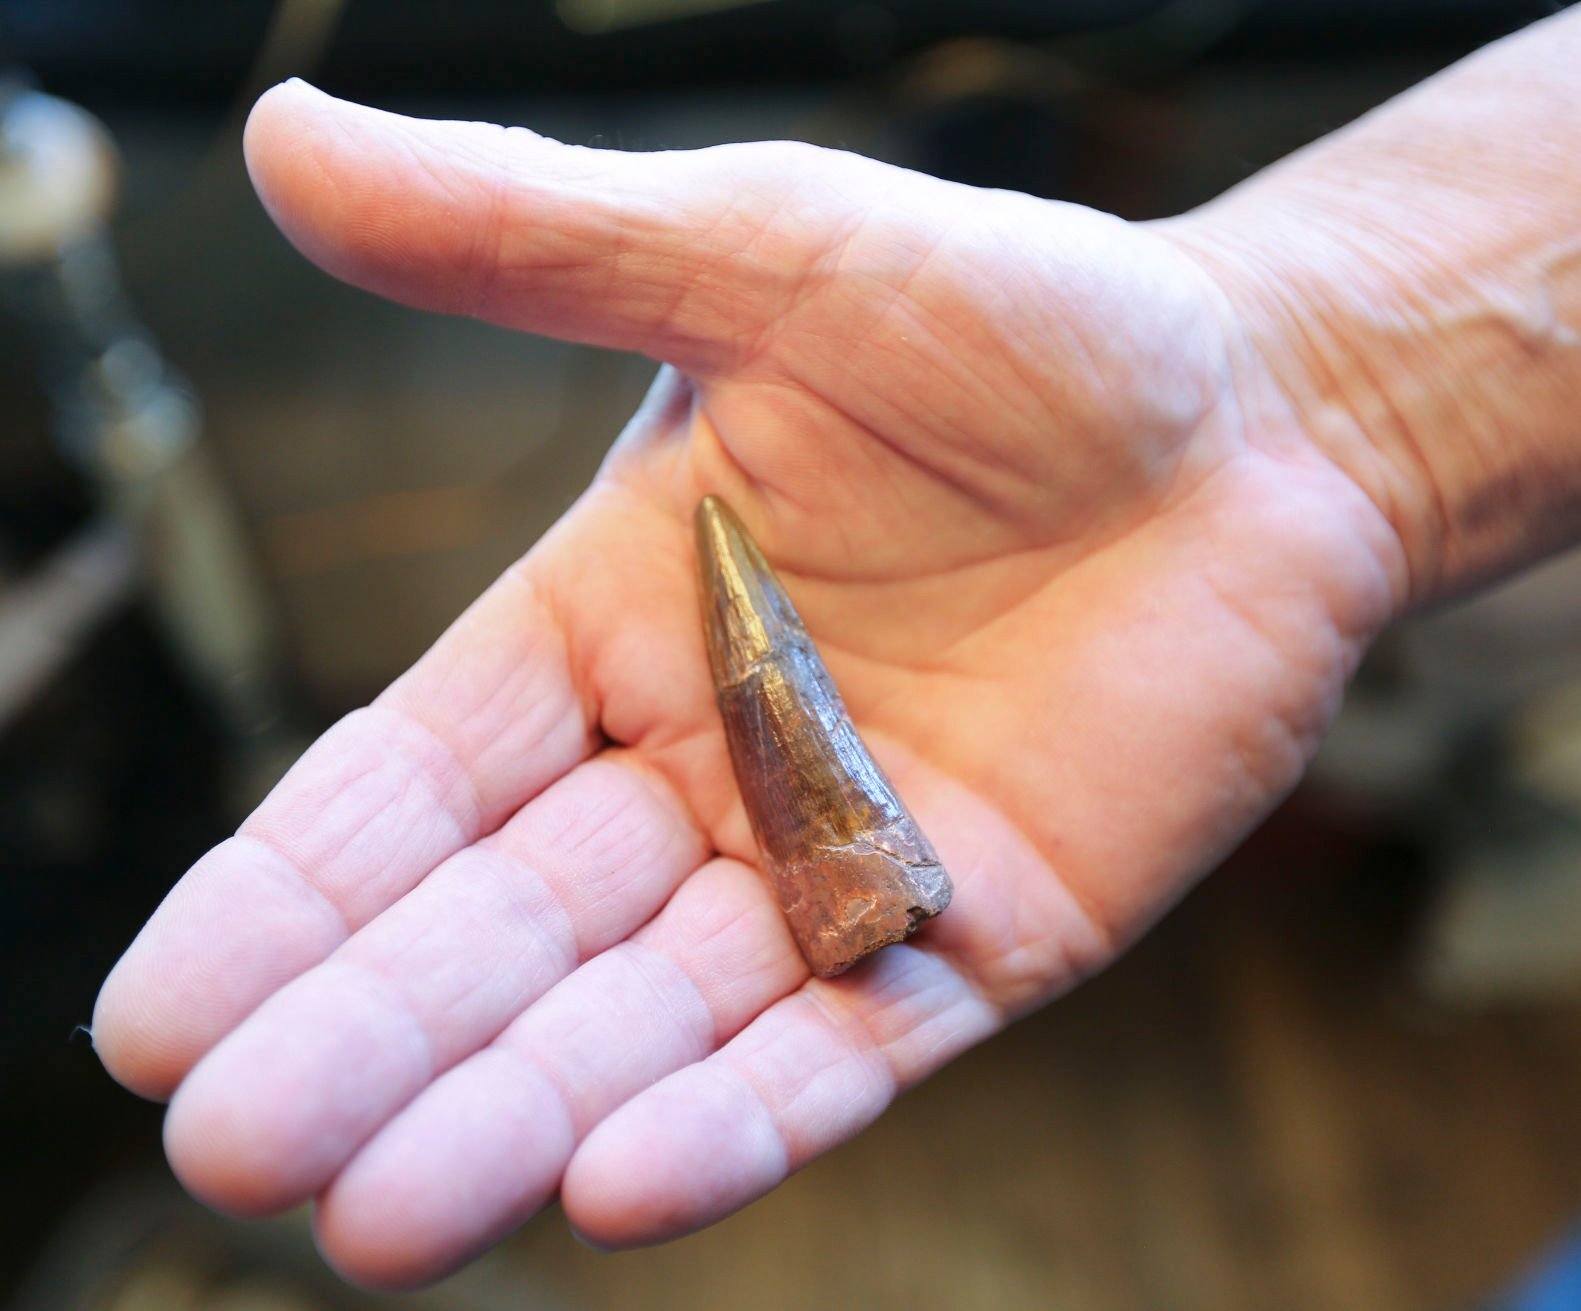 Owner of Rix Antiques, Rick Pariser, of Galena, Ill., holds a fossilized Spinosaurus tooth in his shop on Main Street Galena.    PHOTO CREDIT: Dave Kettering